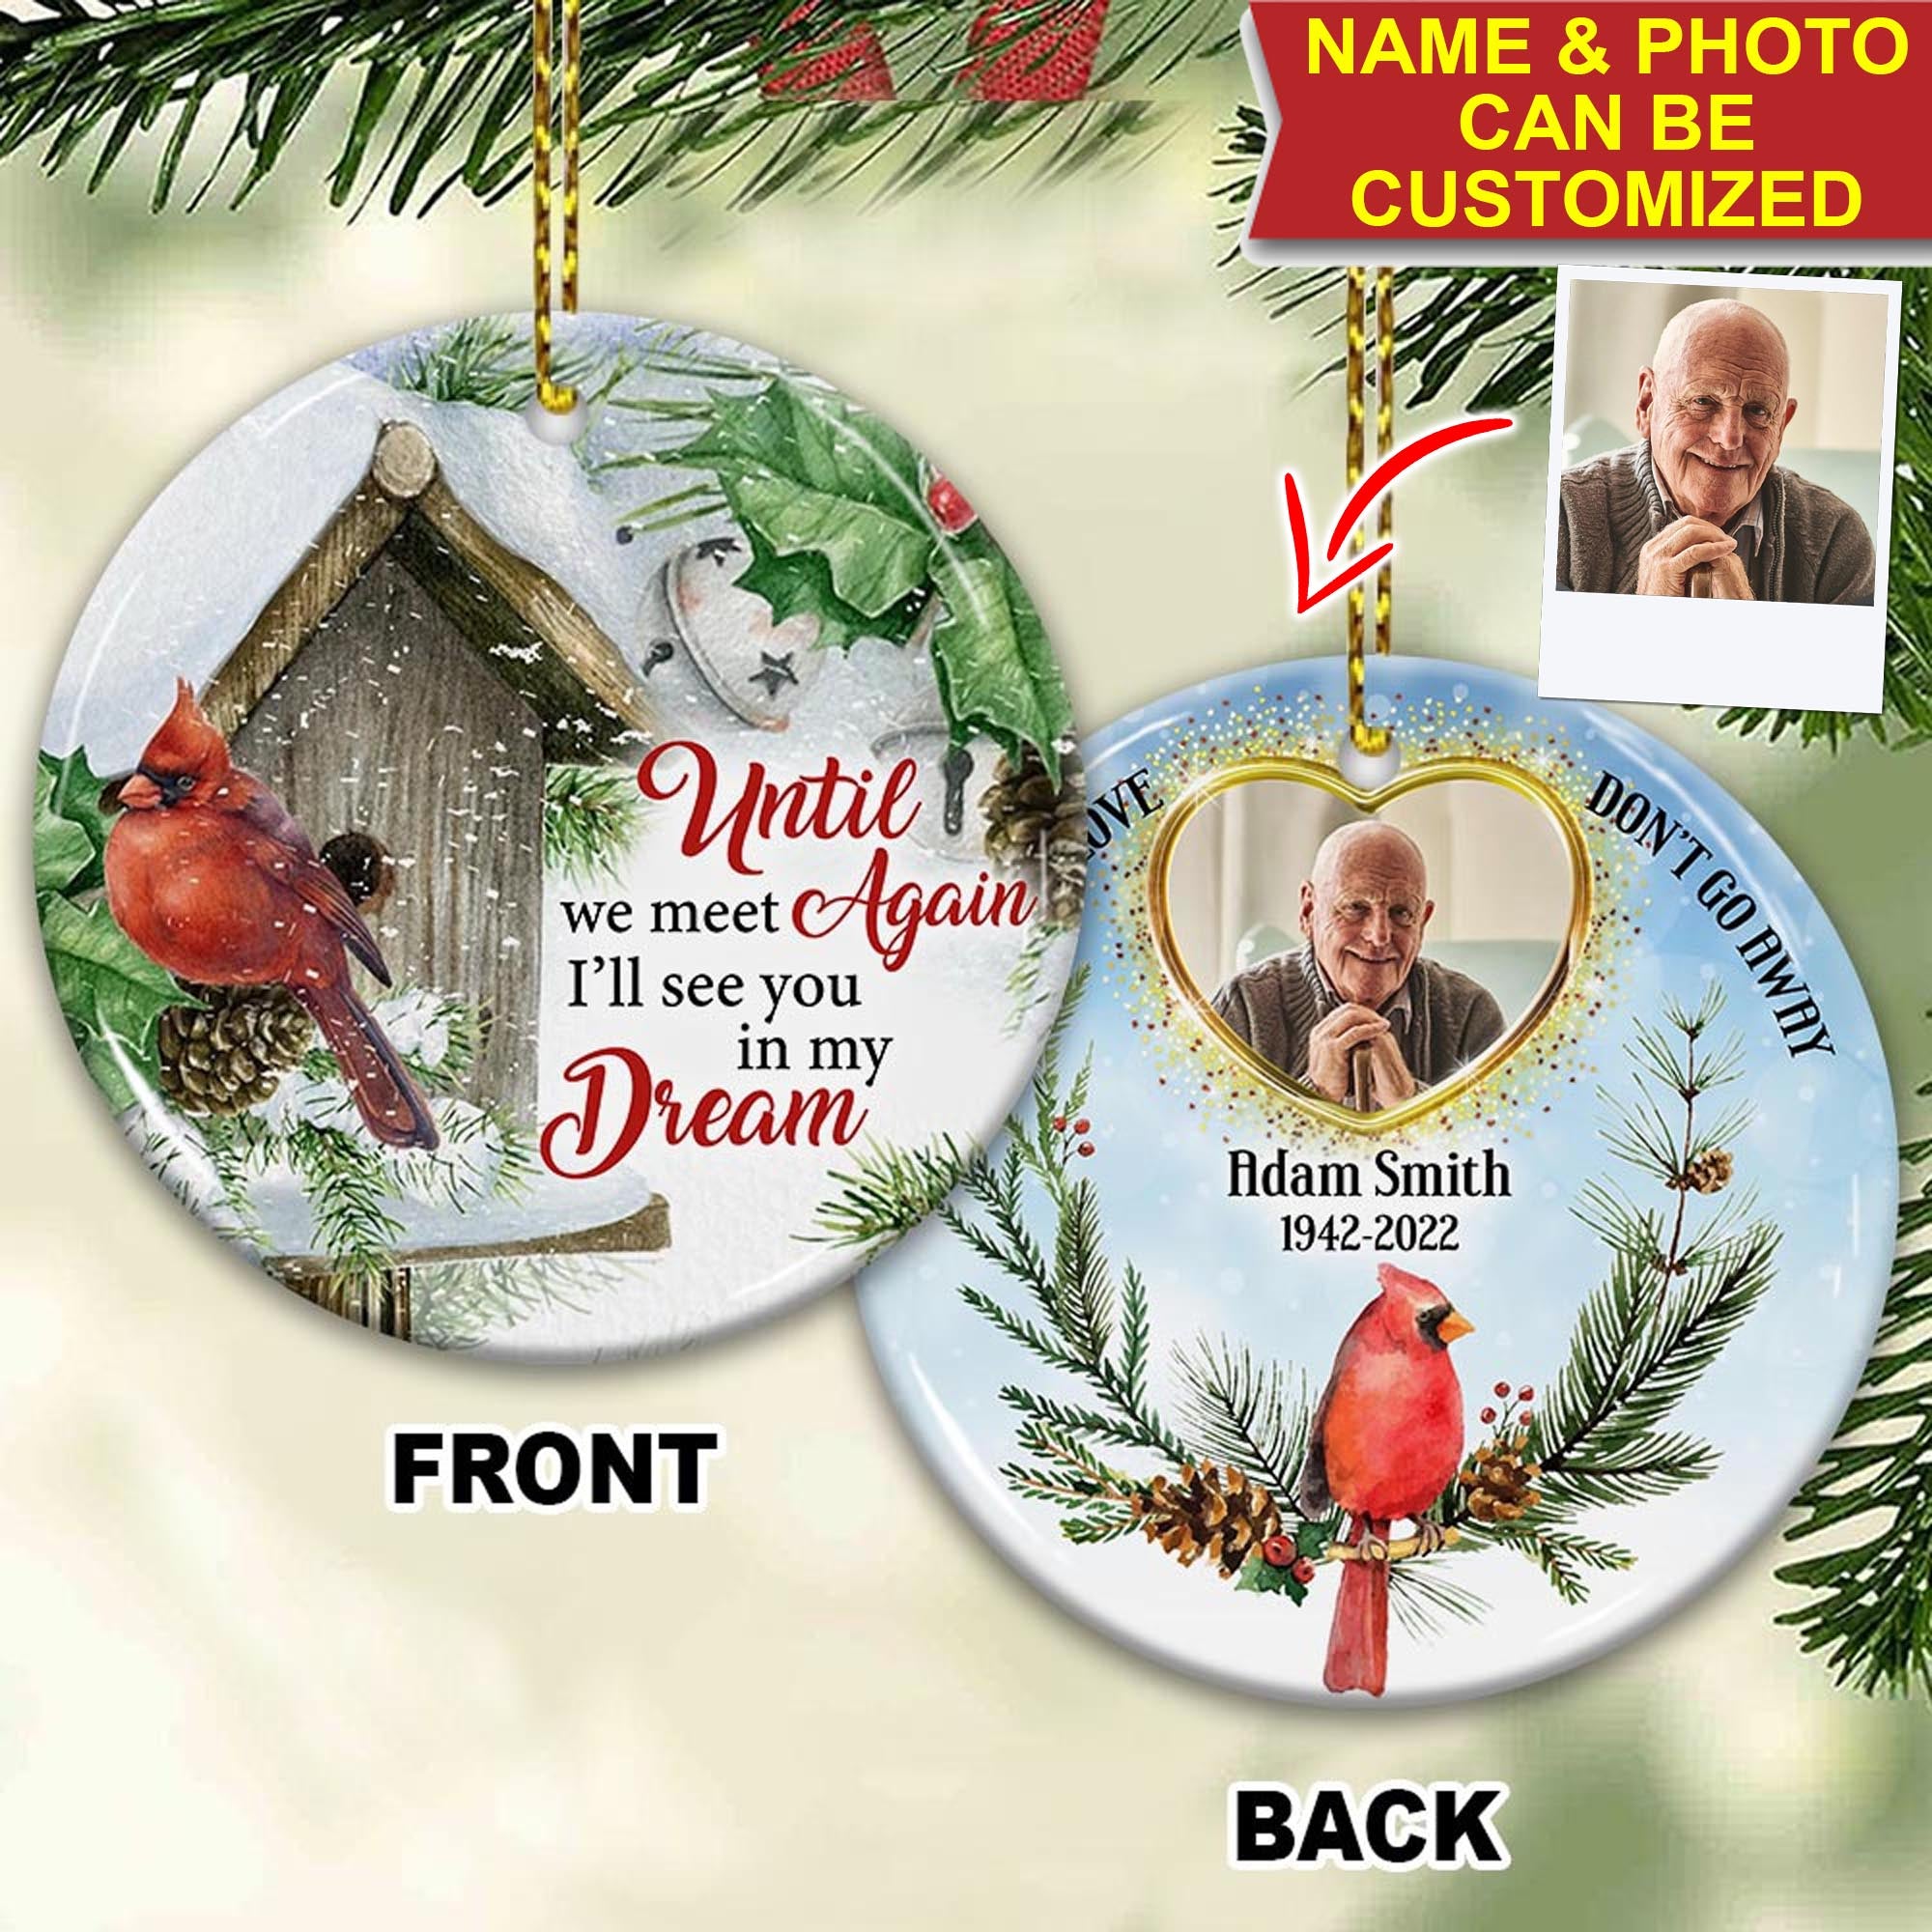 Until We Meet Again I'll See You In My Dream - Custom Photo And Name- Personalized 2 Sides Ceramic Ornament